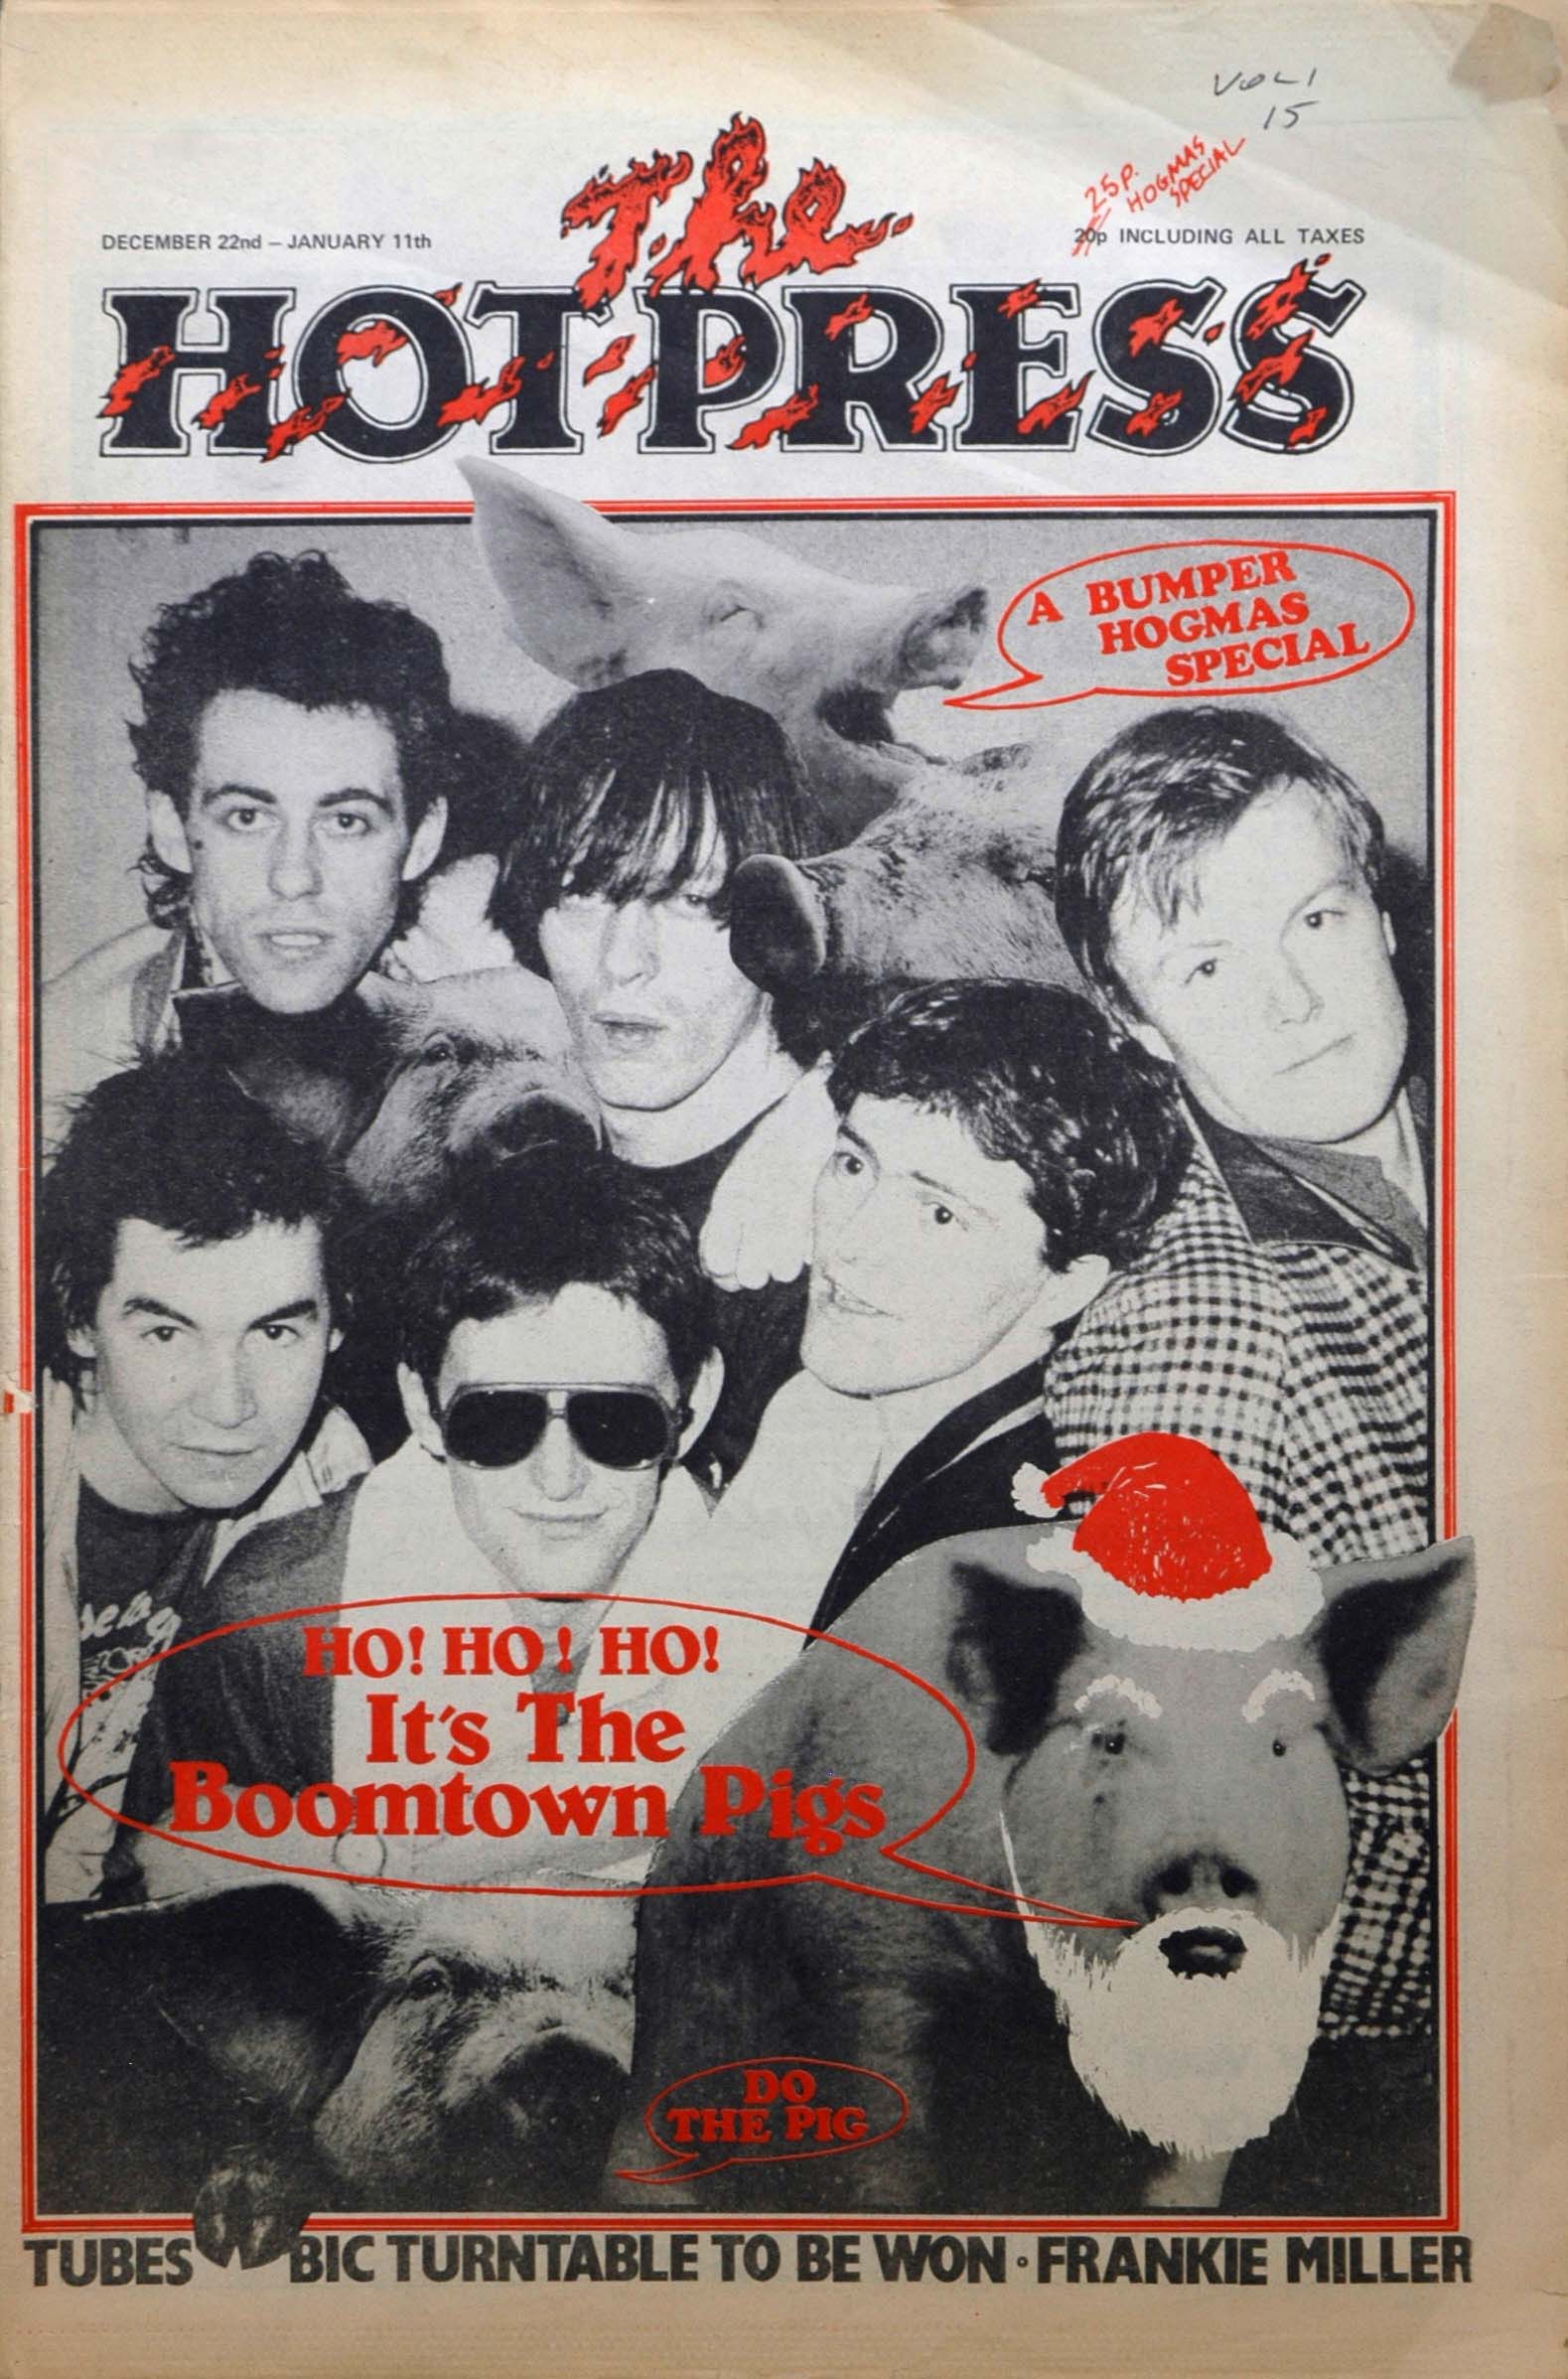 Garry Roberts, founding guitarist of The Boomtown Rats, dies aged